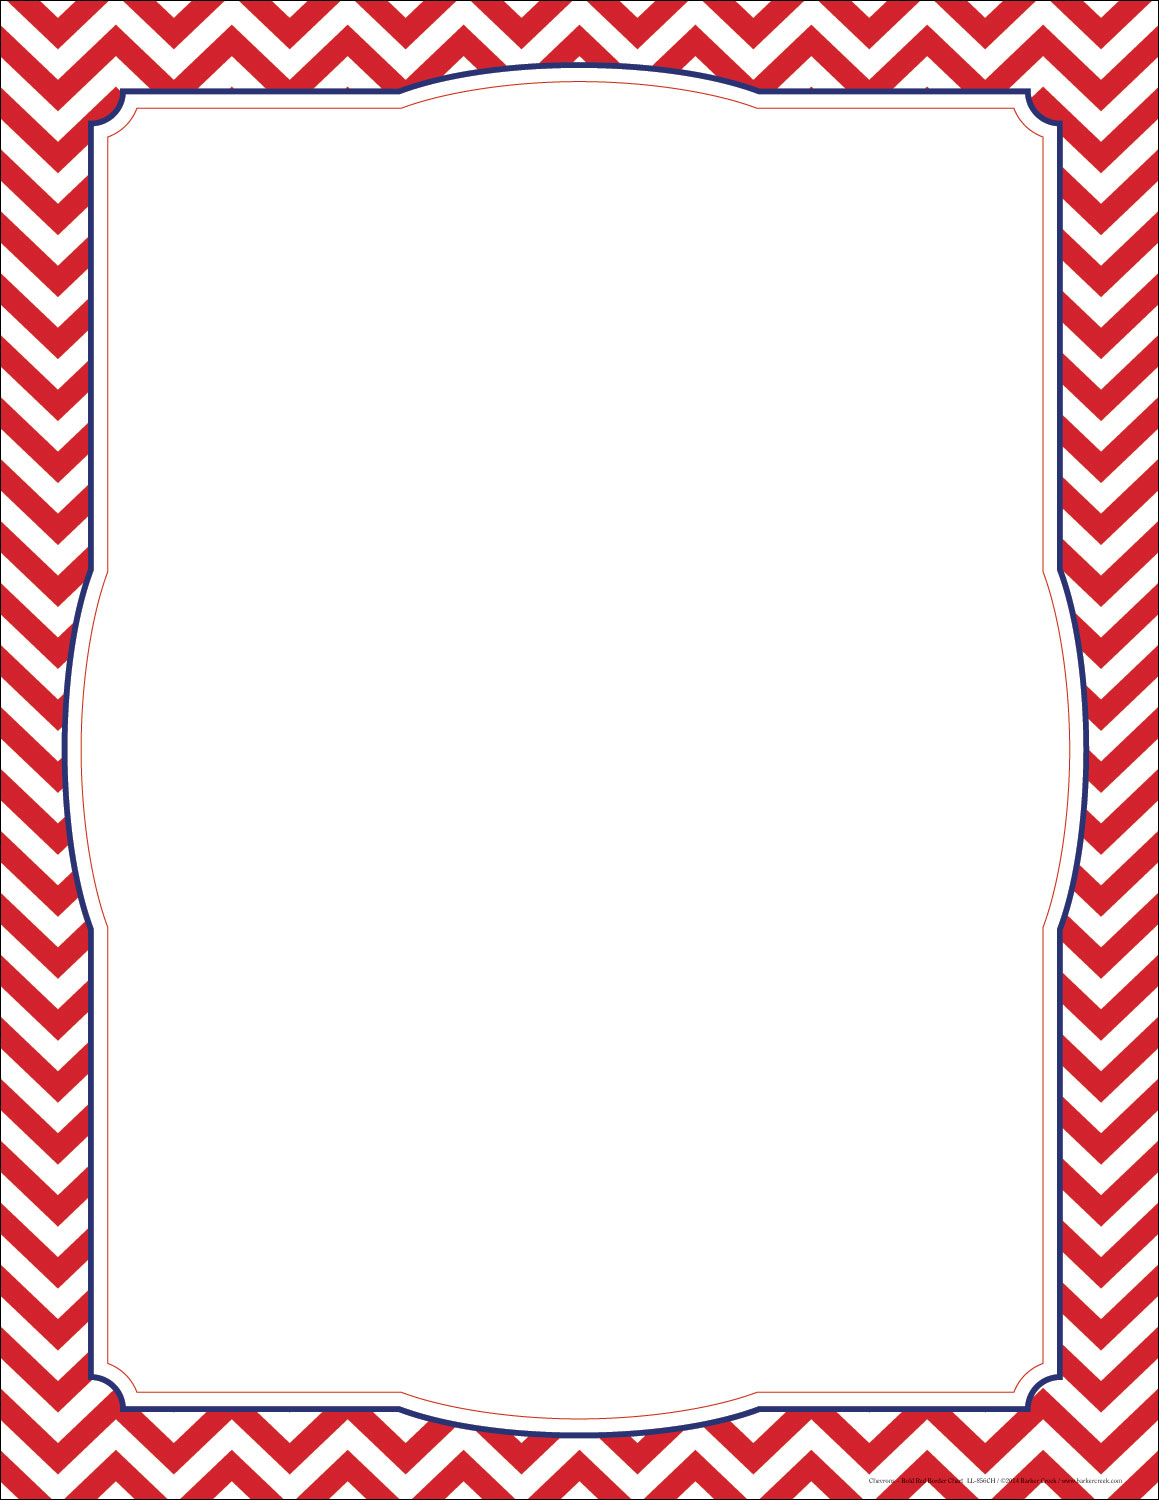 Free Printable Chevron Border Template Just One Side